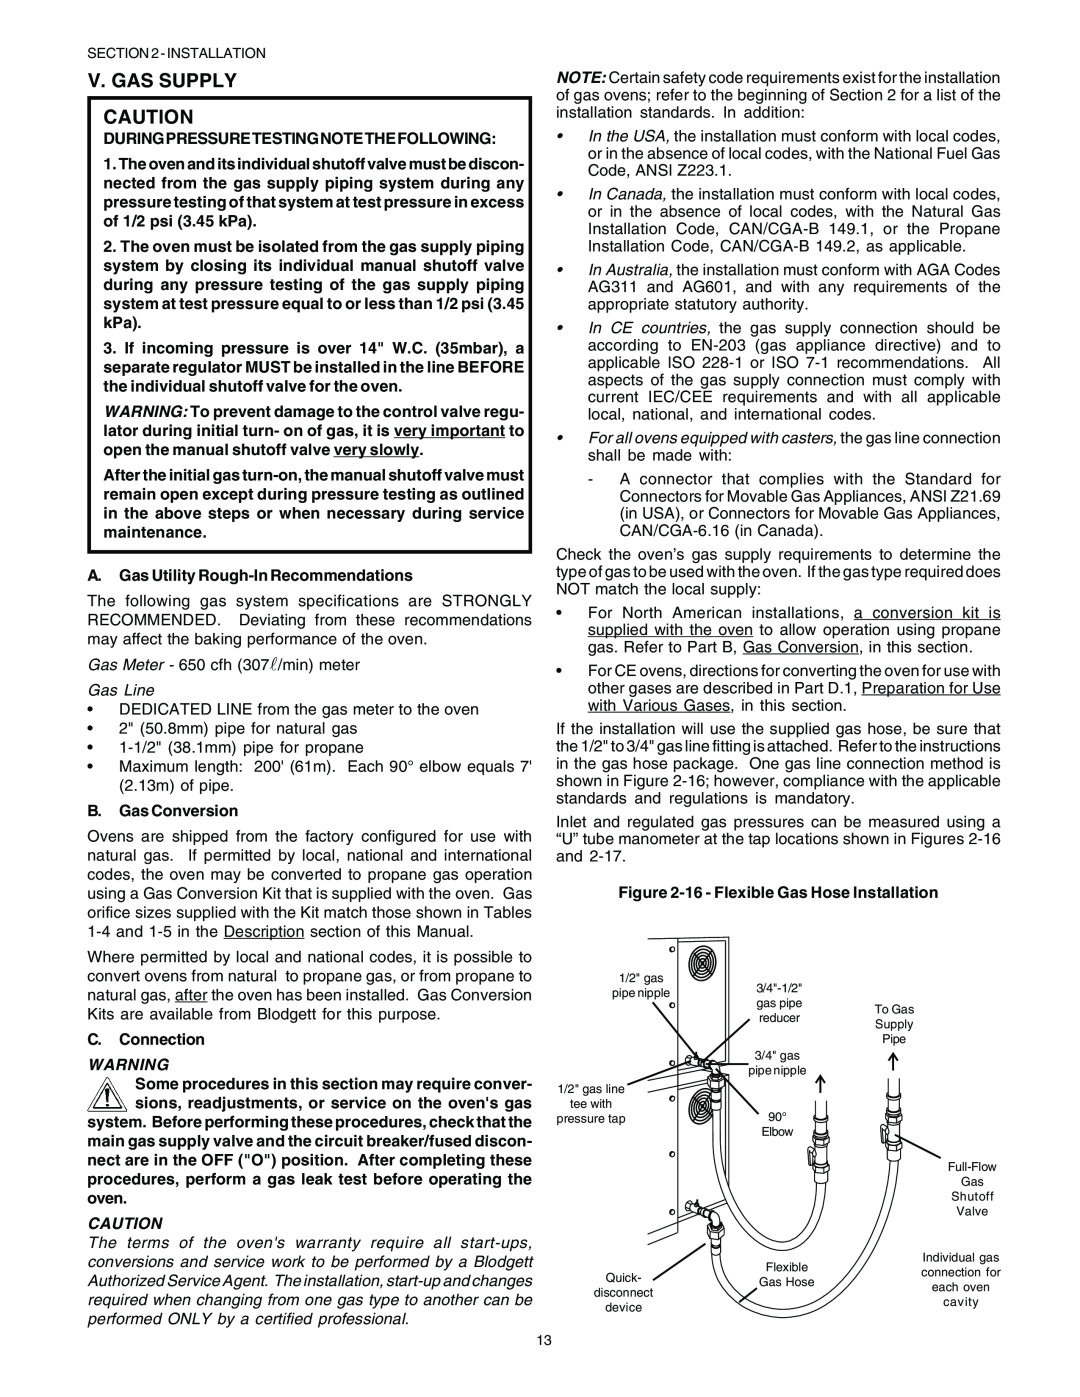 Blodgett BG2136 English, During Pressure Testing Note The Following, A. Gas Utility Rough-In Recommendations, Gas Line 